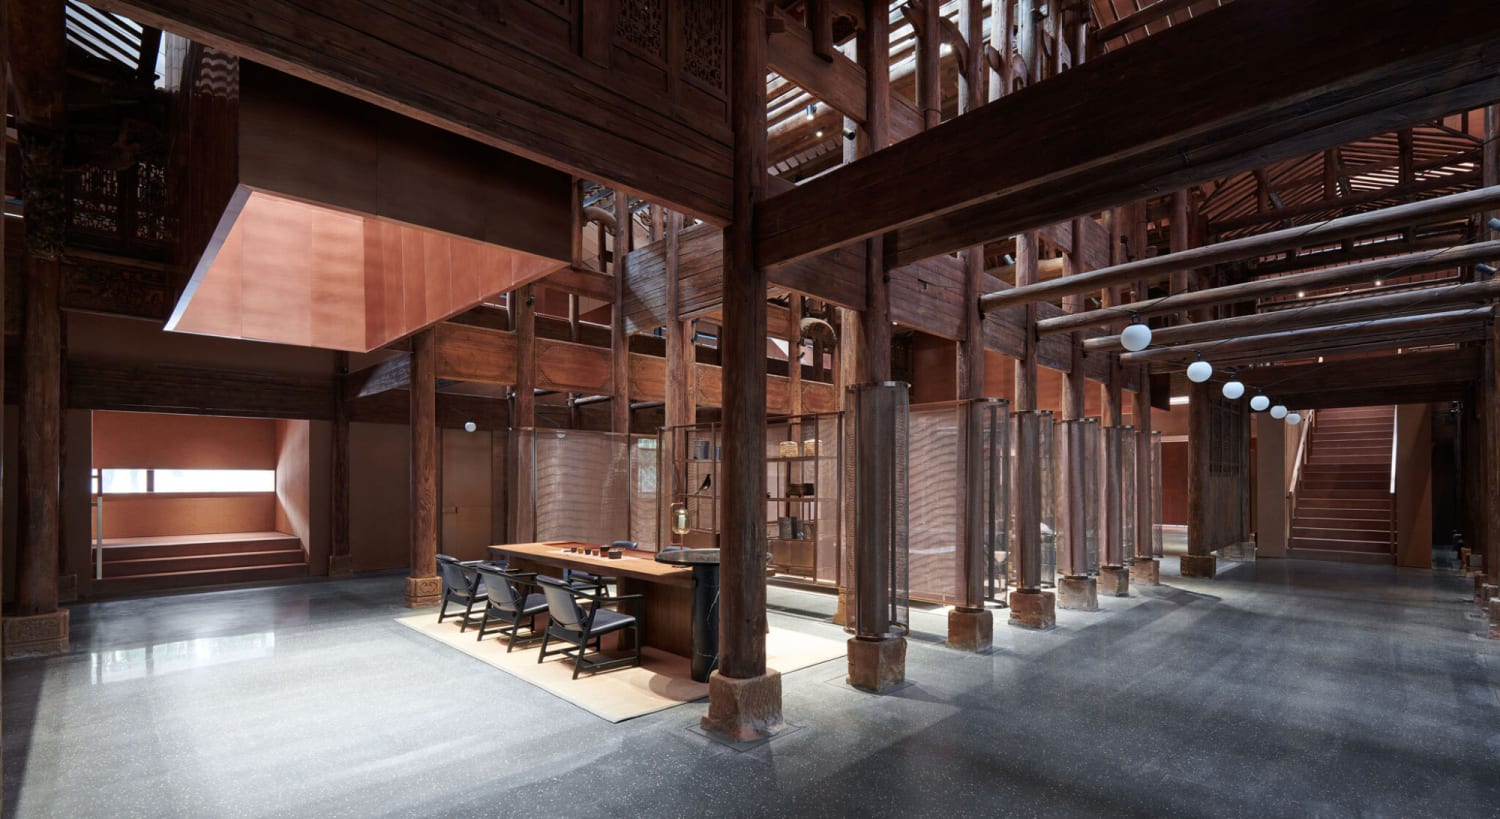 Neri & Hu Mastermind a Breathtaking Teahouse inspired by an Ancient Buddhist Temple in Fuzhou, China – SURFACE